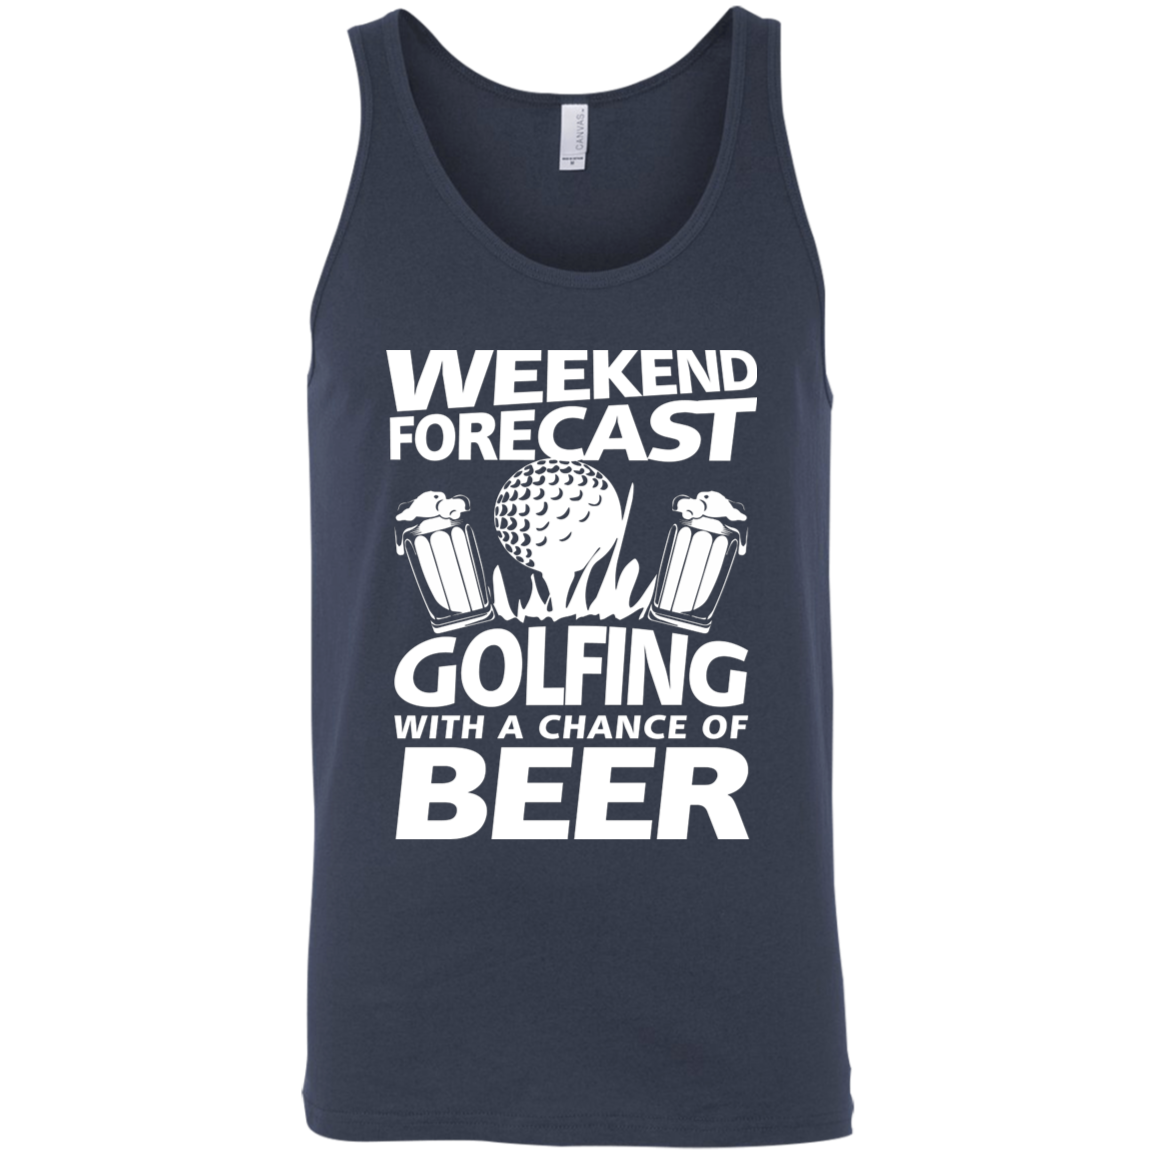 Weekend Forecast Golfing With A Chance Of Beer Tank Top Apparel - The Beer Lodge